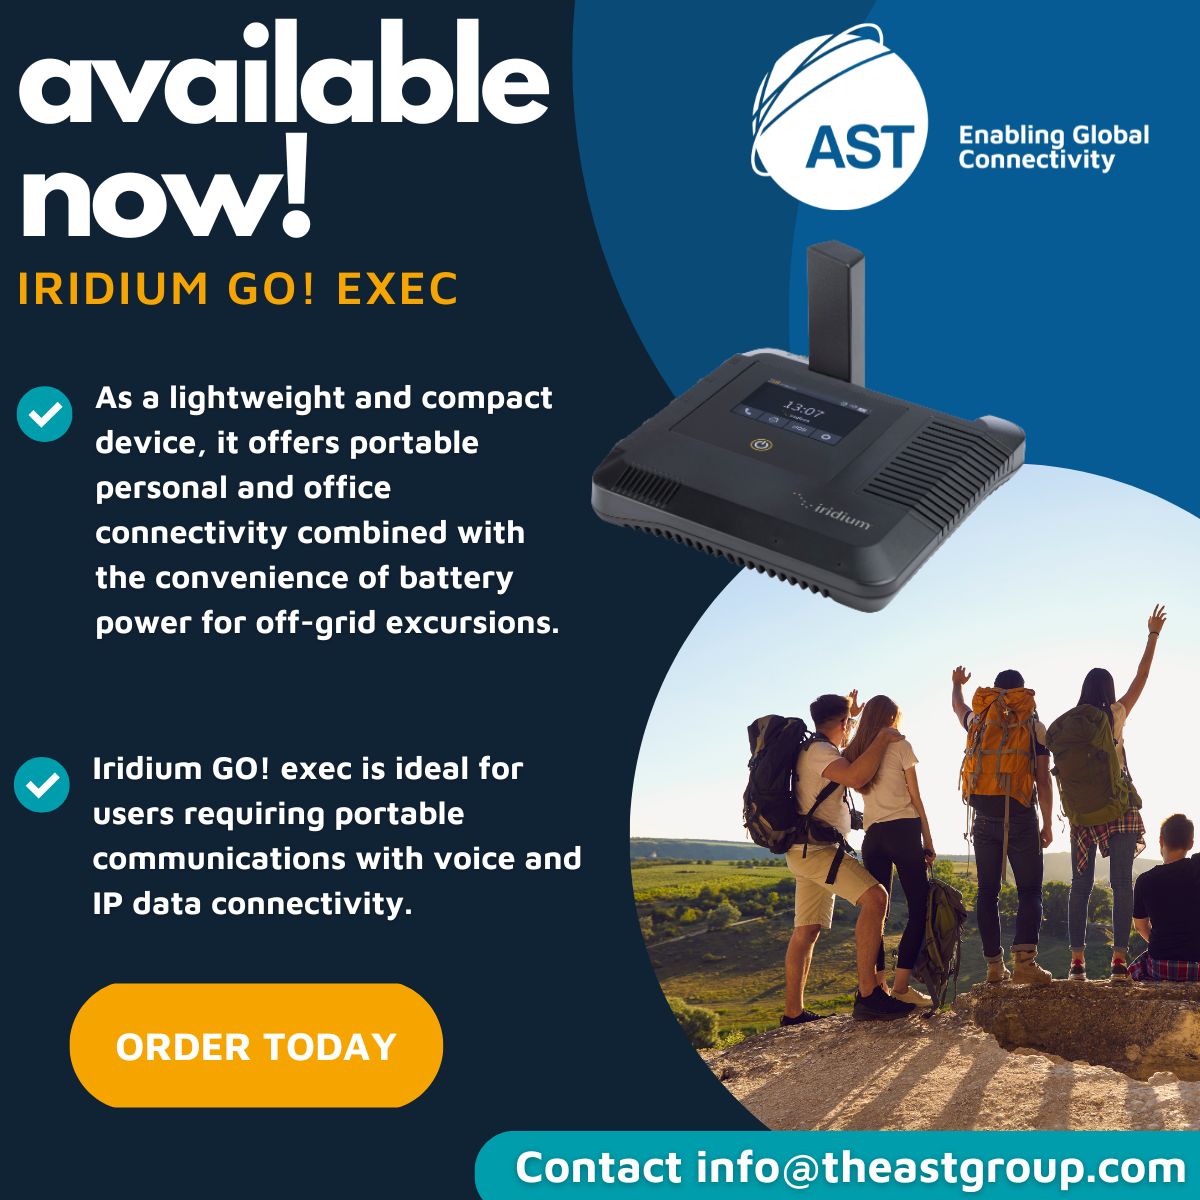 Take your connectivity to the next level with the all-new Iridium GO! Exec. Stay connected anywhere on the planet with this compact, portable satellite hotspot. Contact us today - info@theastgroup.com #IridiumGOExec #StayConnectedAnywhere